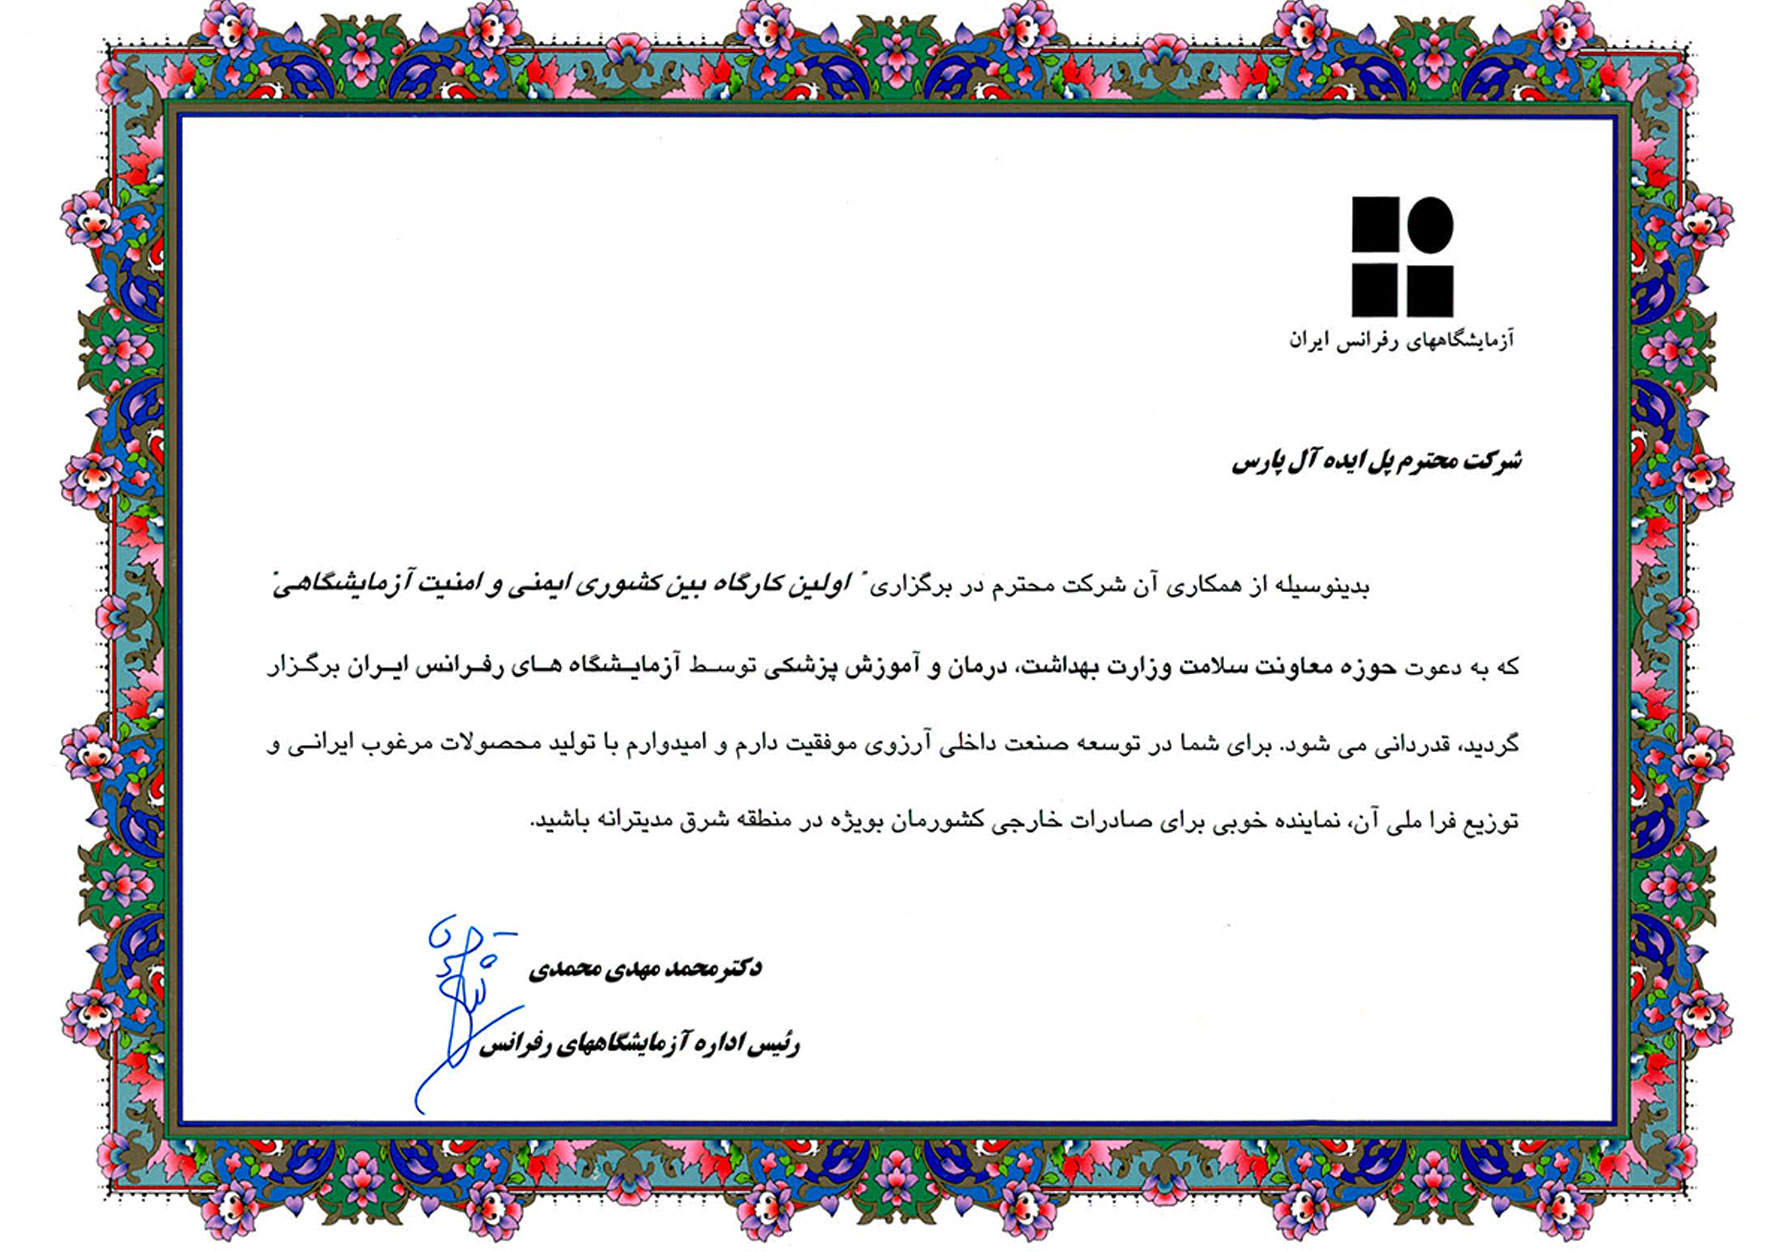 Certificate from the Iranian Laboratory Association